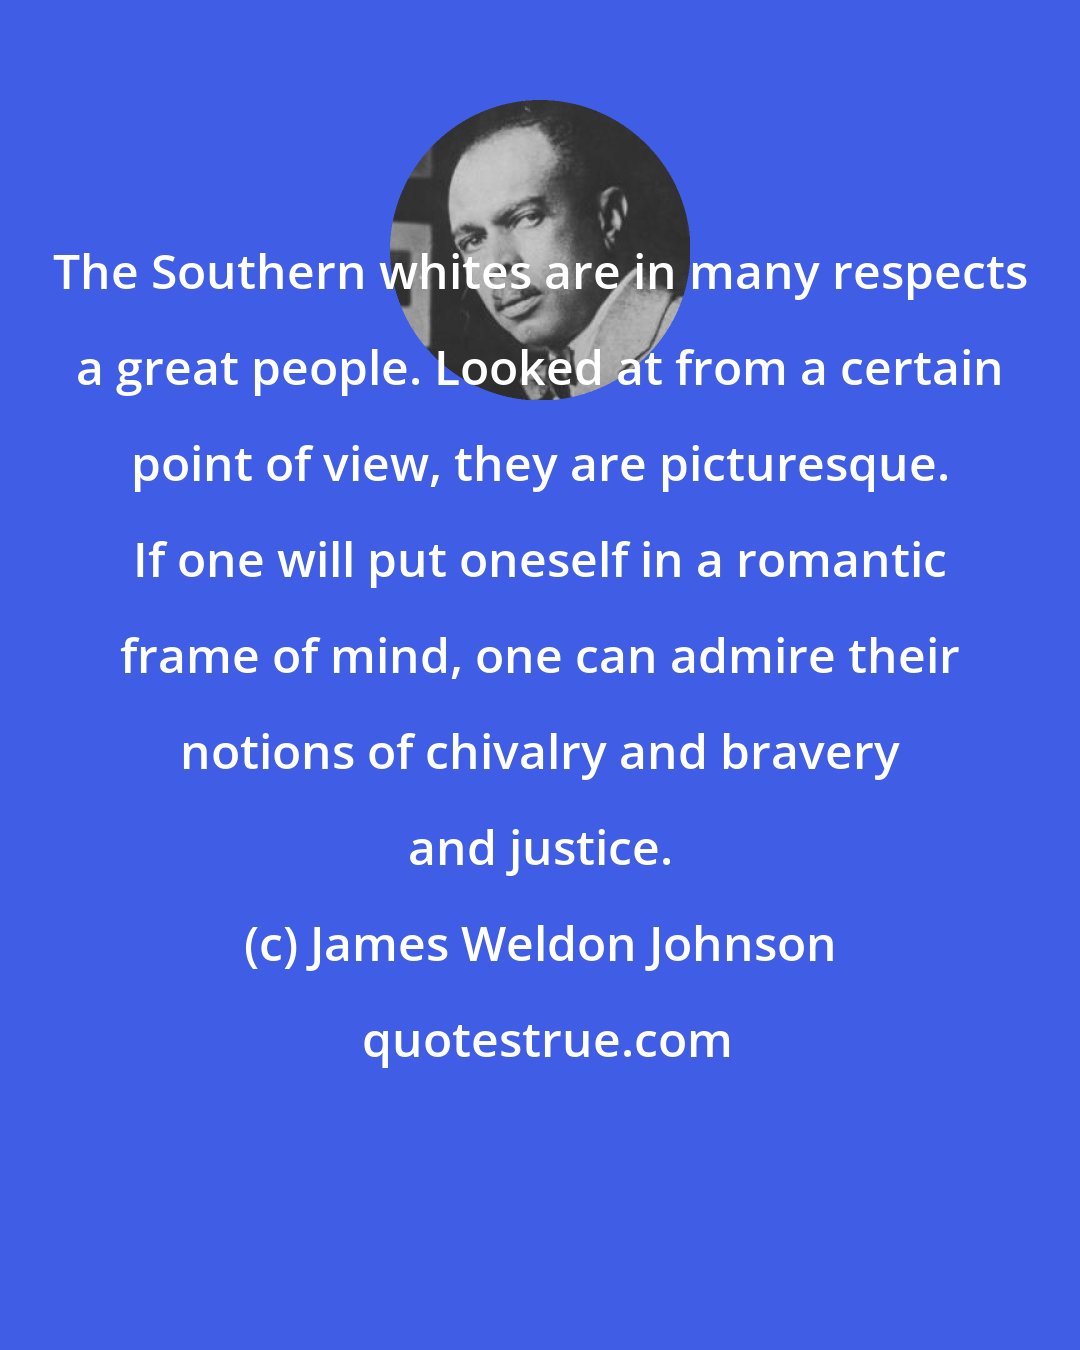 James Weldon Johnson: The Southern whites are in many respects a great people. Looked at from a certain point of view, they are picturesque. If one will put oneself in a romantic frame of mind, one can admire their notions of chivalry and bravery and justice.